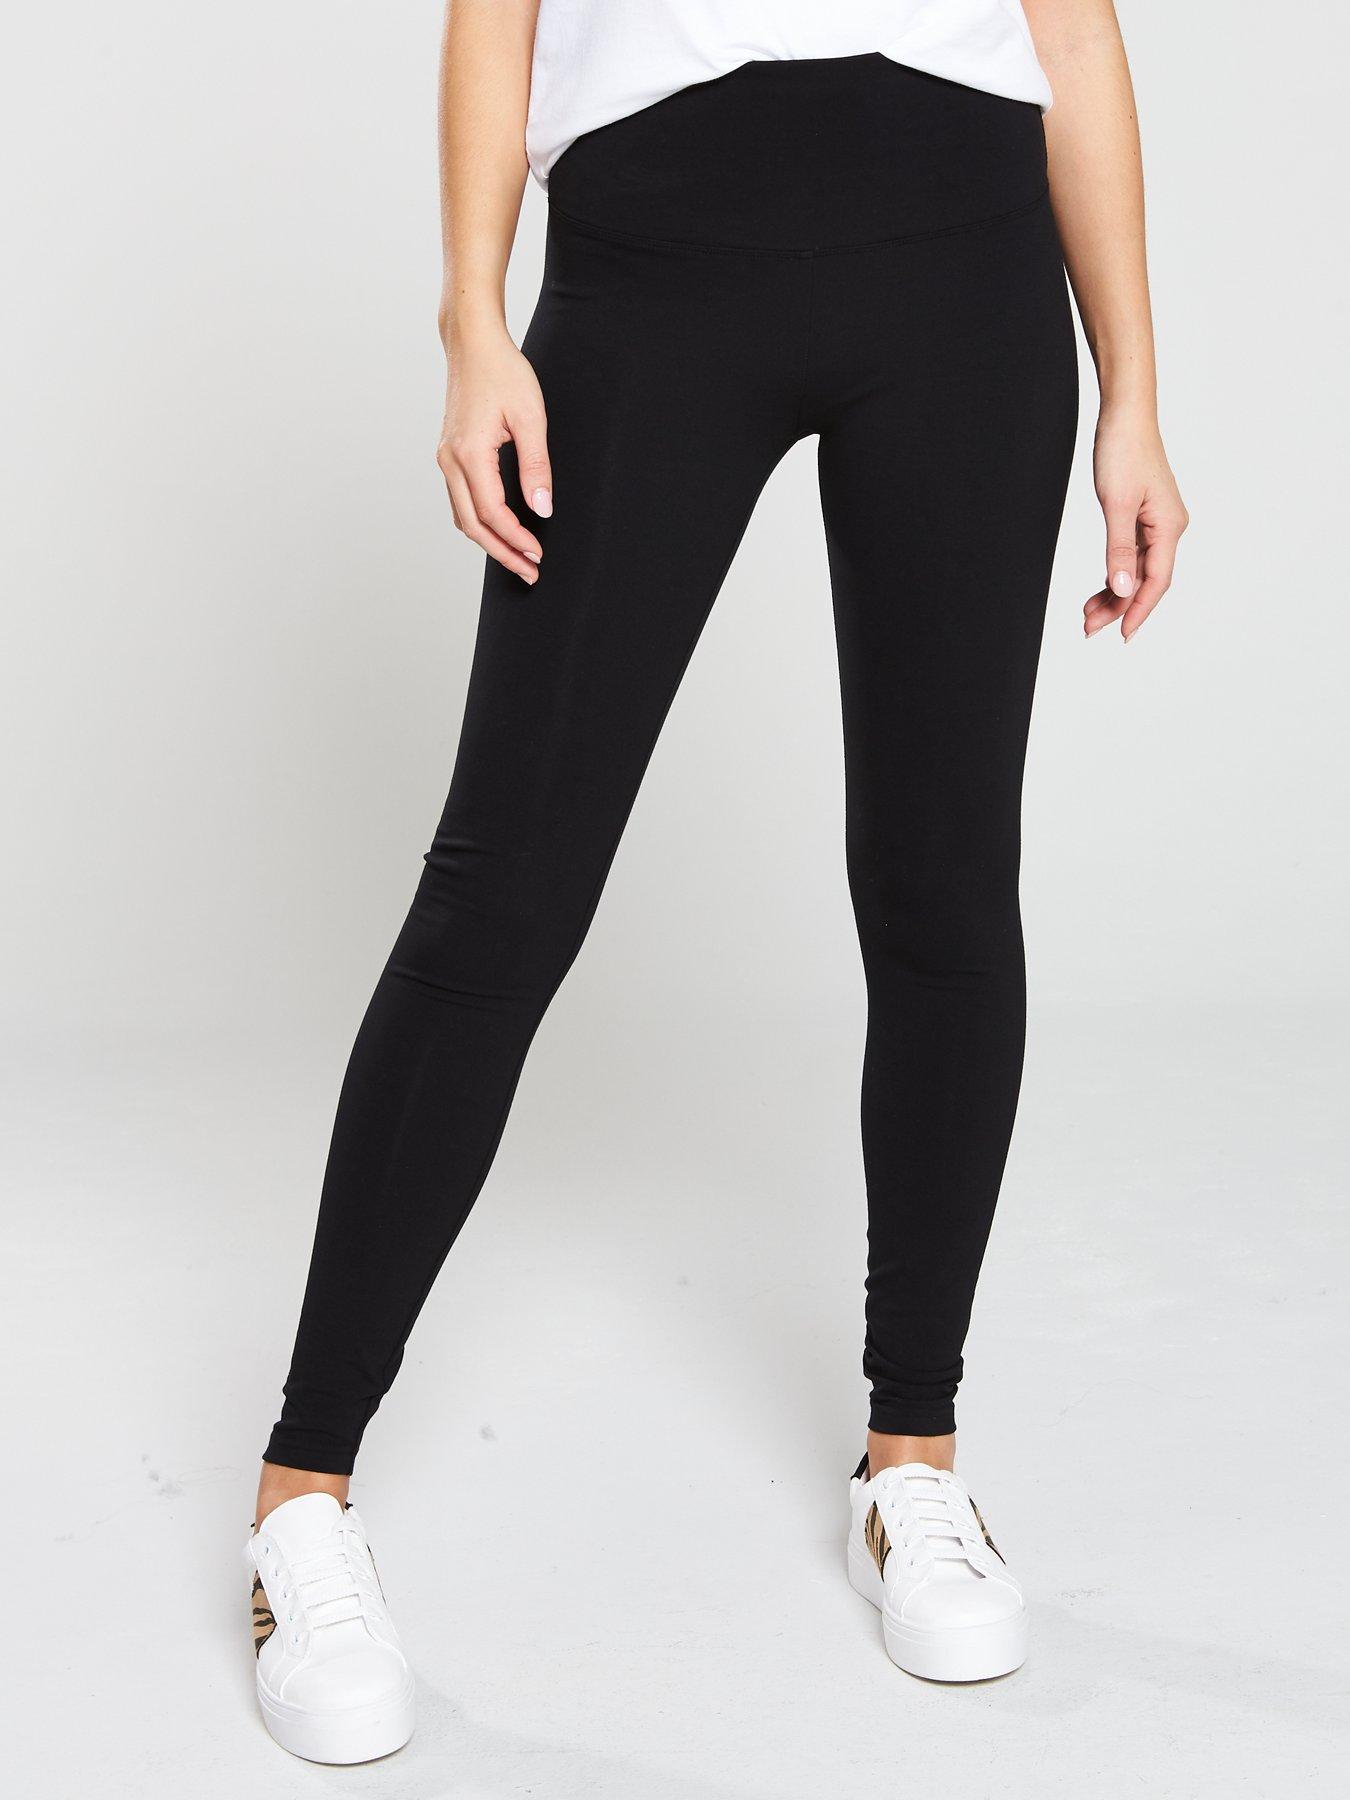  RATIVE Thick High Waist Yoga Pants No See Through with